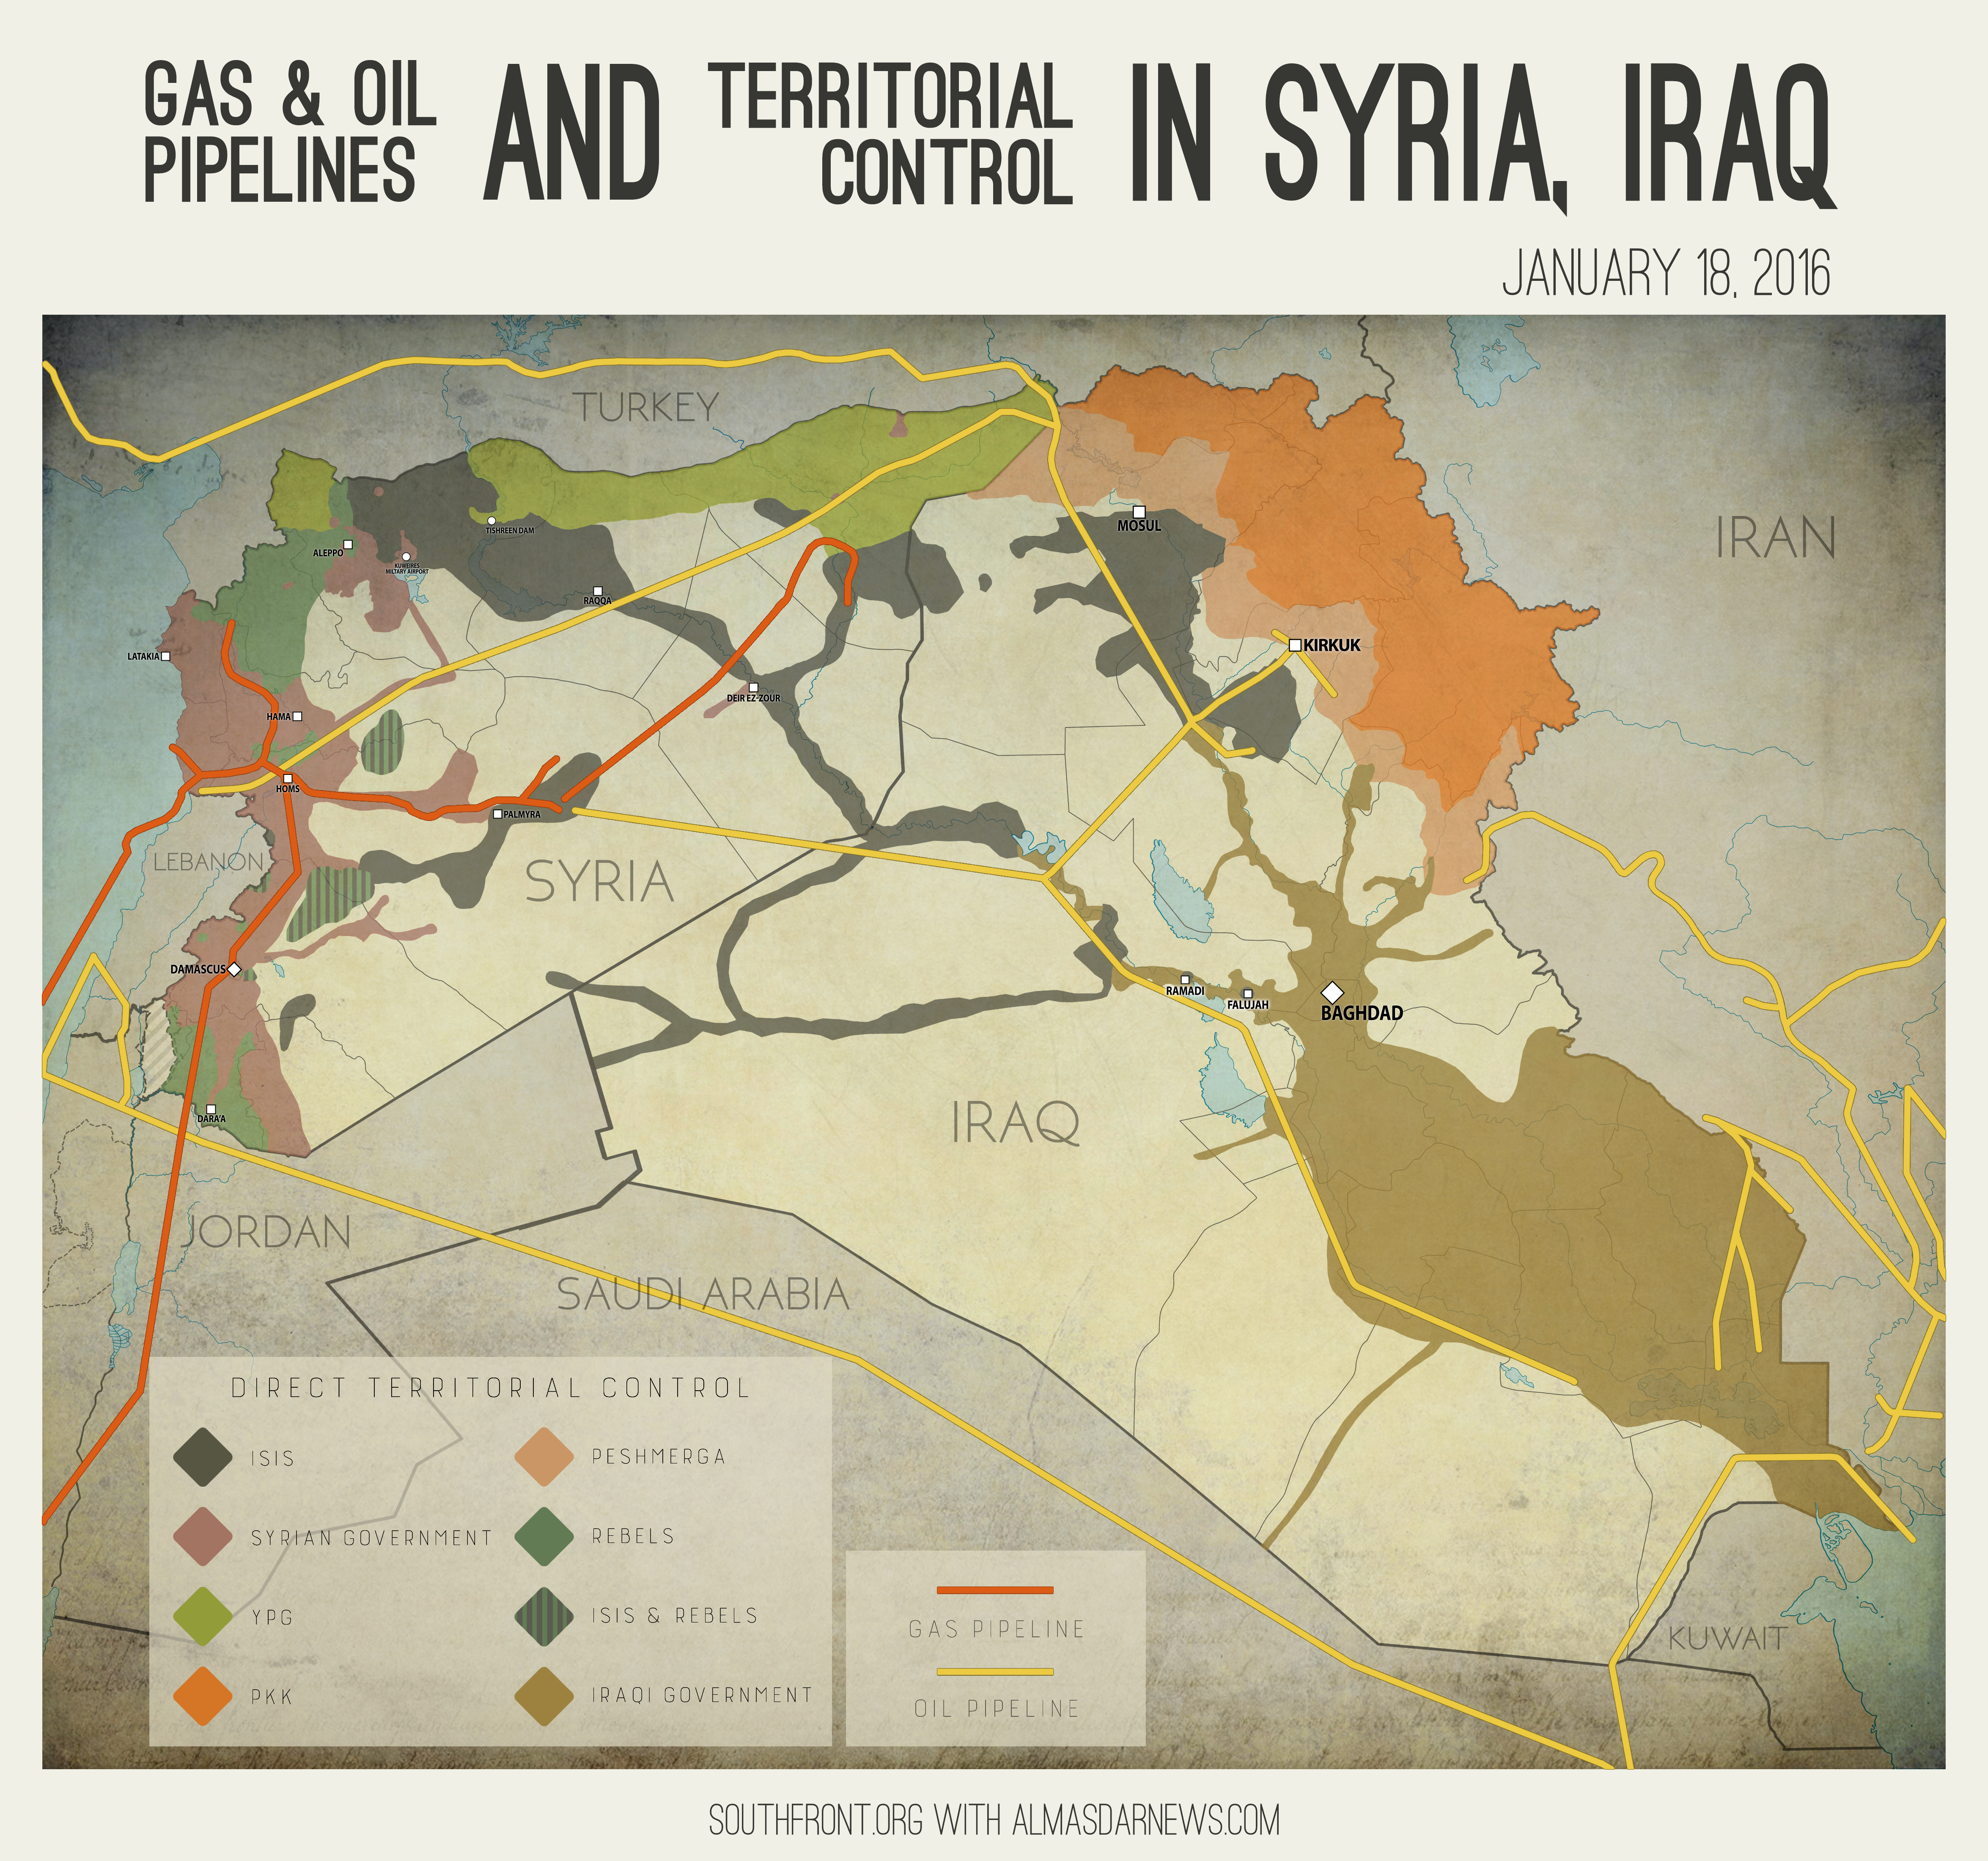 Gas & oil pipelines and territorial control in Syria, Iraq (Infographics)